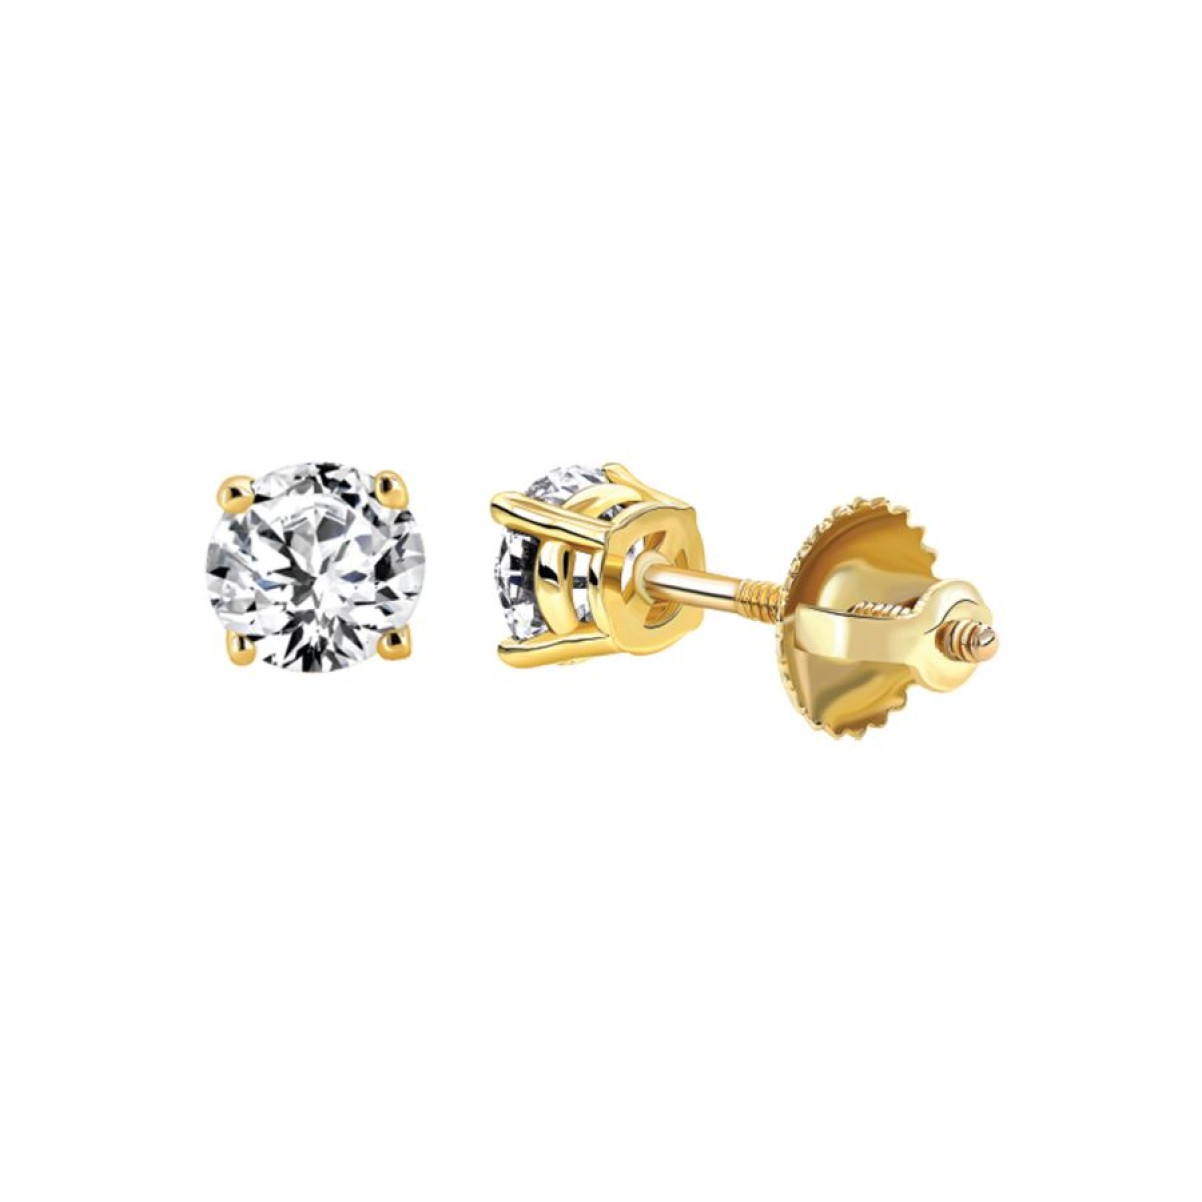 SOLITAIRE EARRINGS 0.50CT ROUND DIAMOND 14k YELLOW GOLD